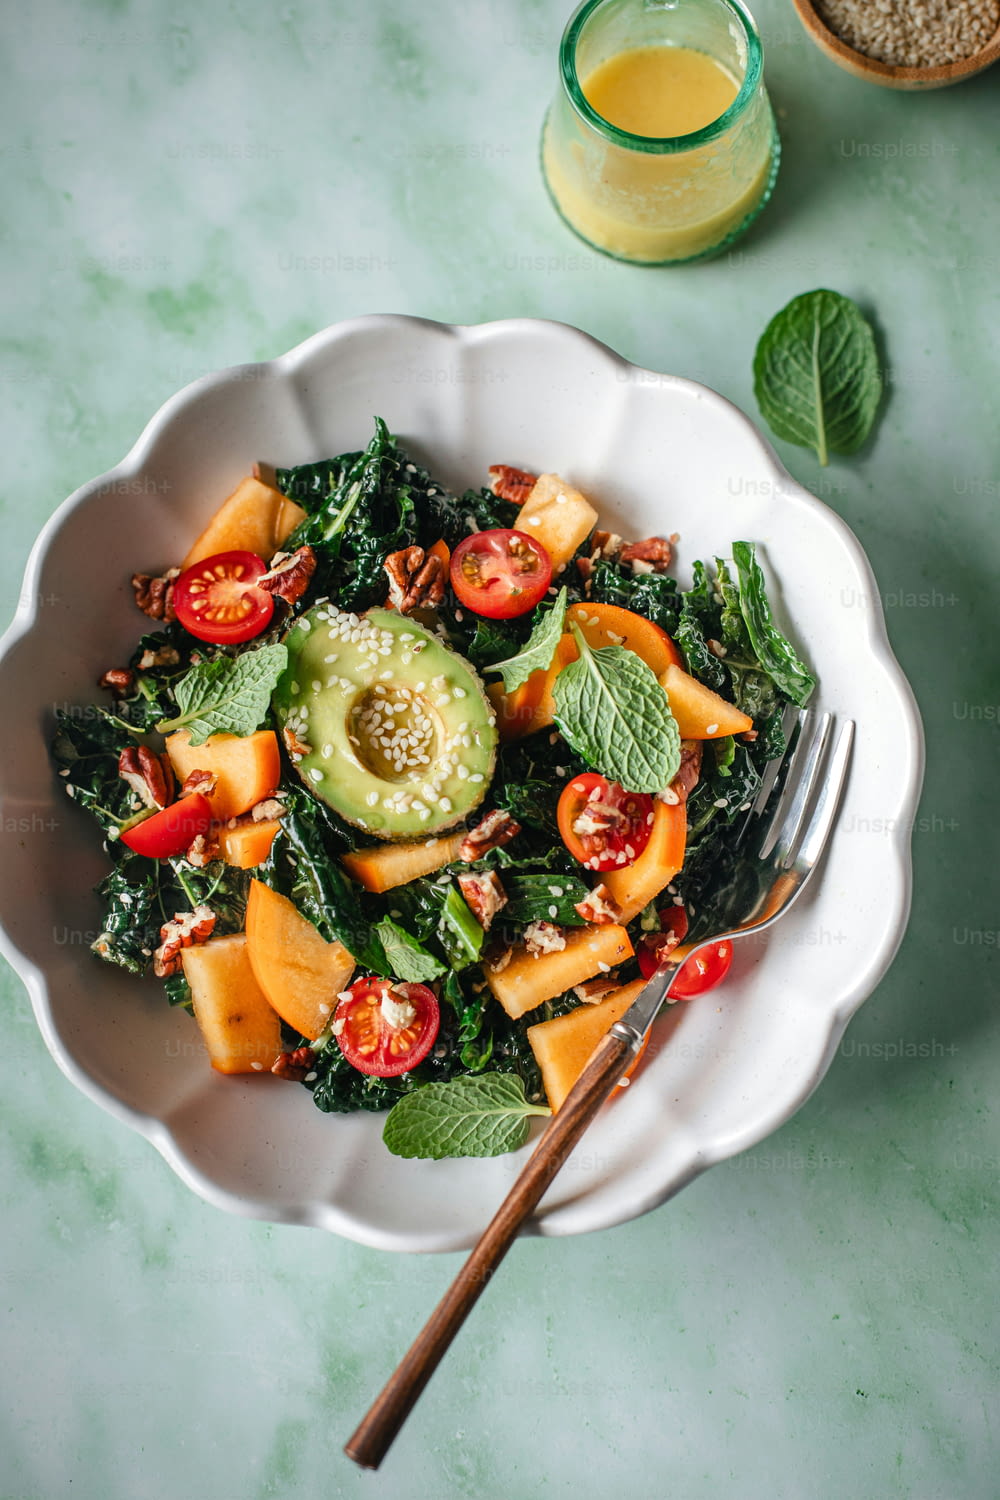 a salad with avocado, tomatoes, and spinach